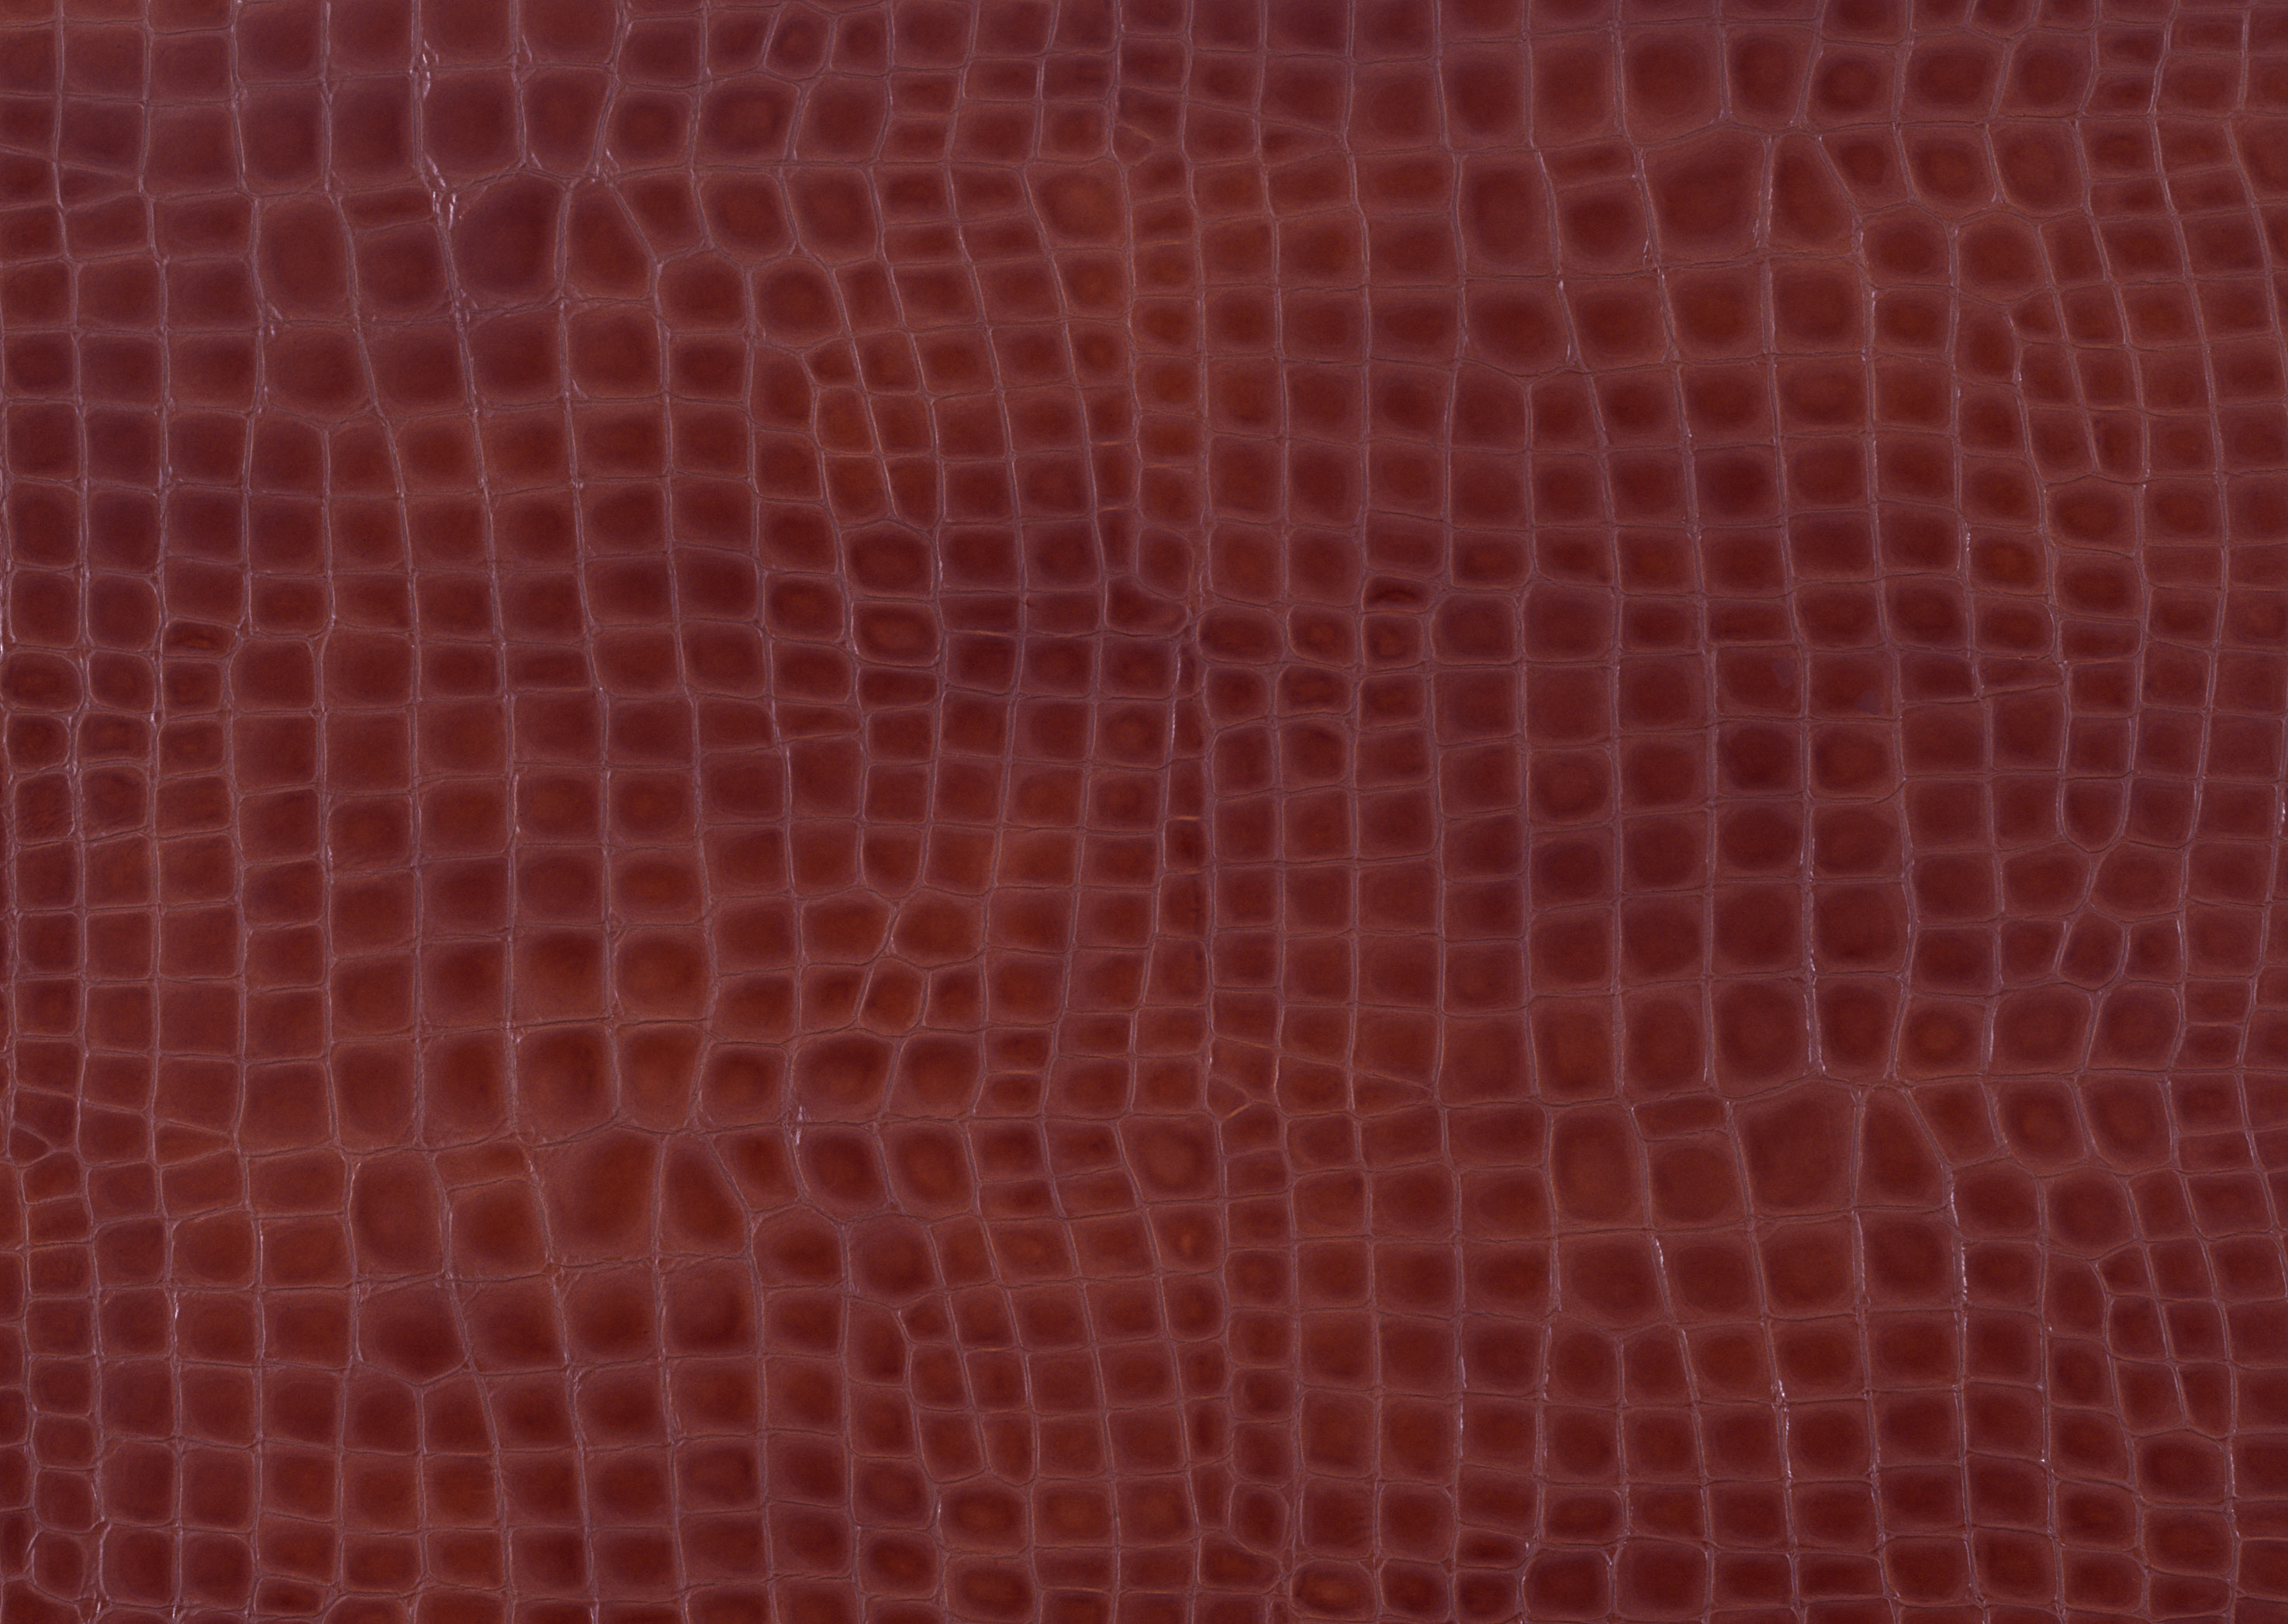 Leather texture background image